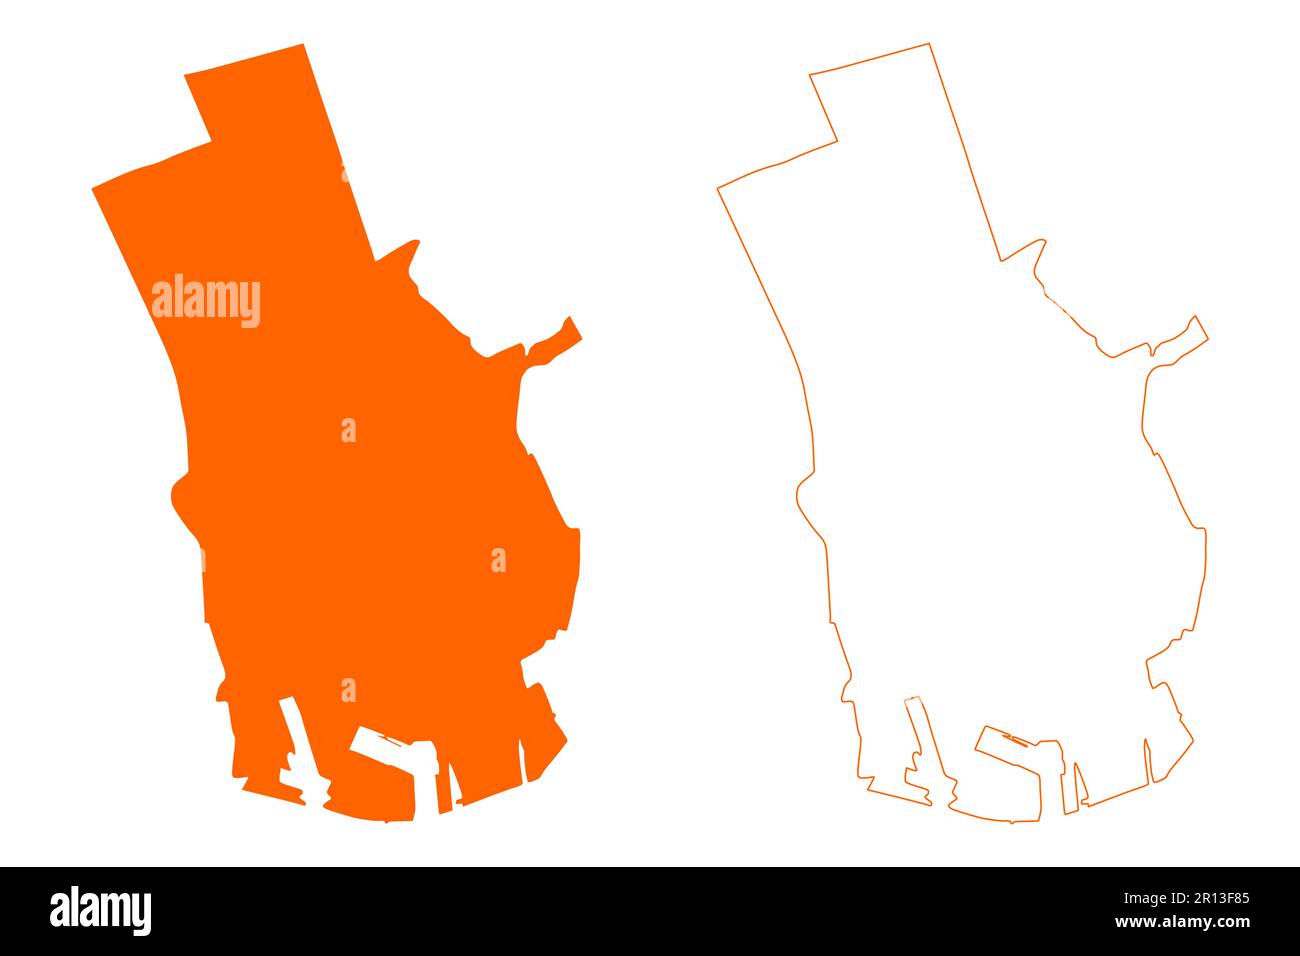 Schiedam city and municipality (Kingdom of the Netherlands, Holland, South Holland or Zuid-Holland province) map vector illustration, scribble sketch Stock Vector